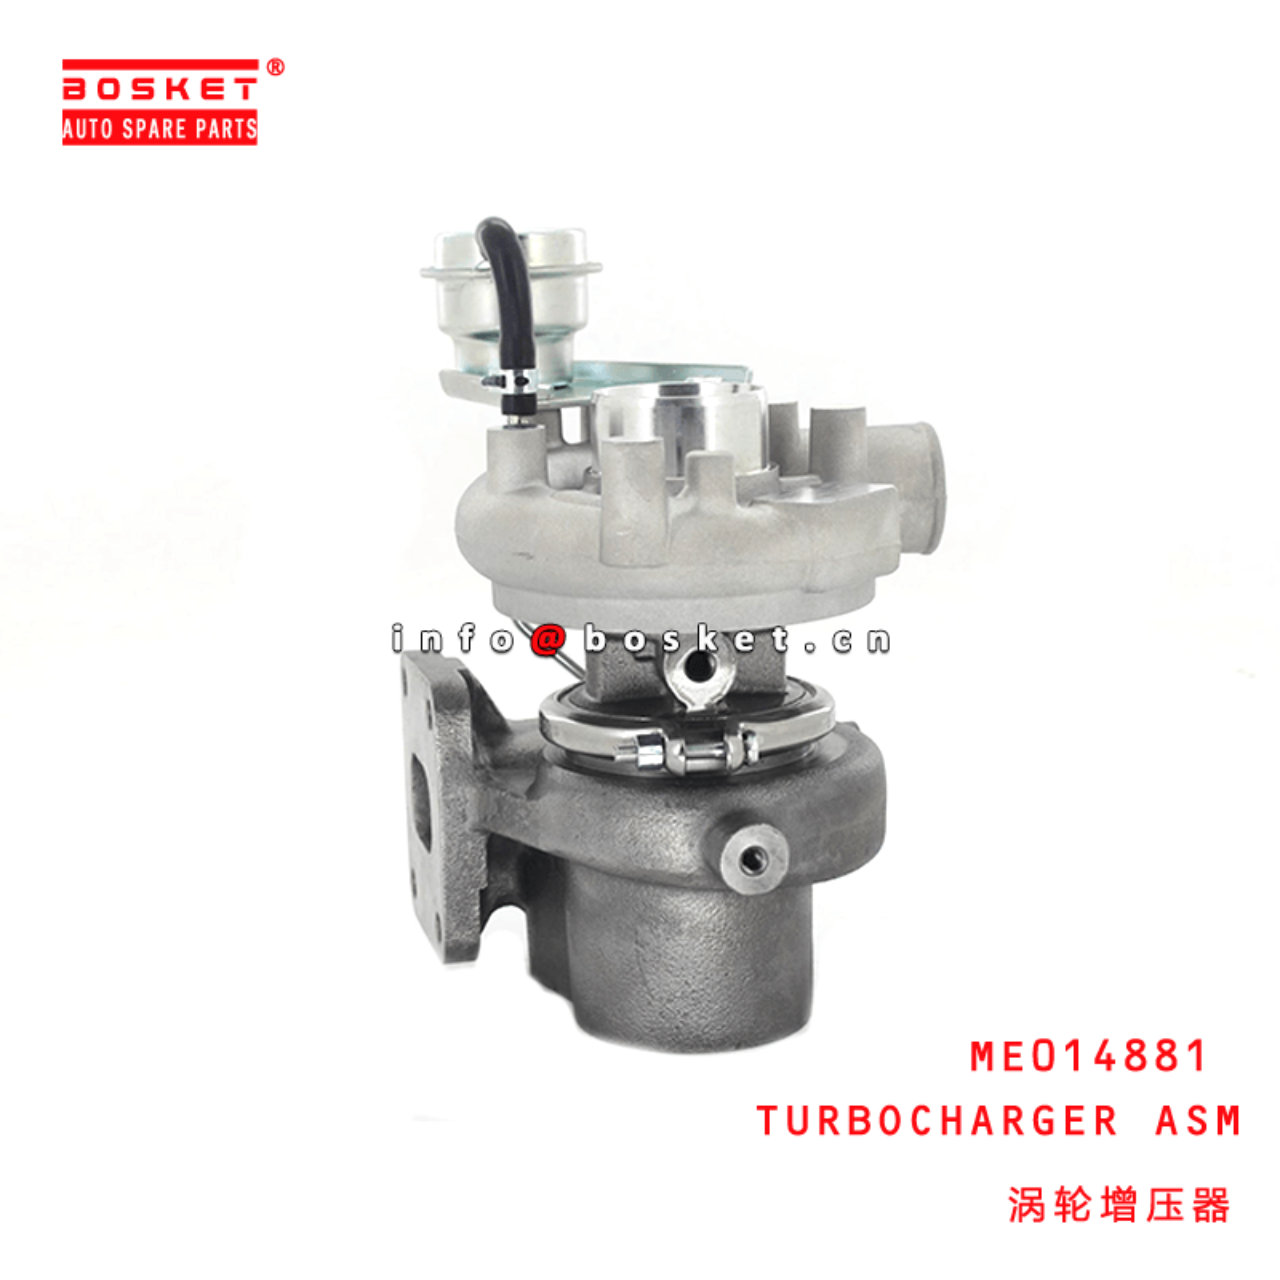 ME014881 Turbocharger Assembly Suitable For MITSUBISHI FUSO 